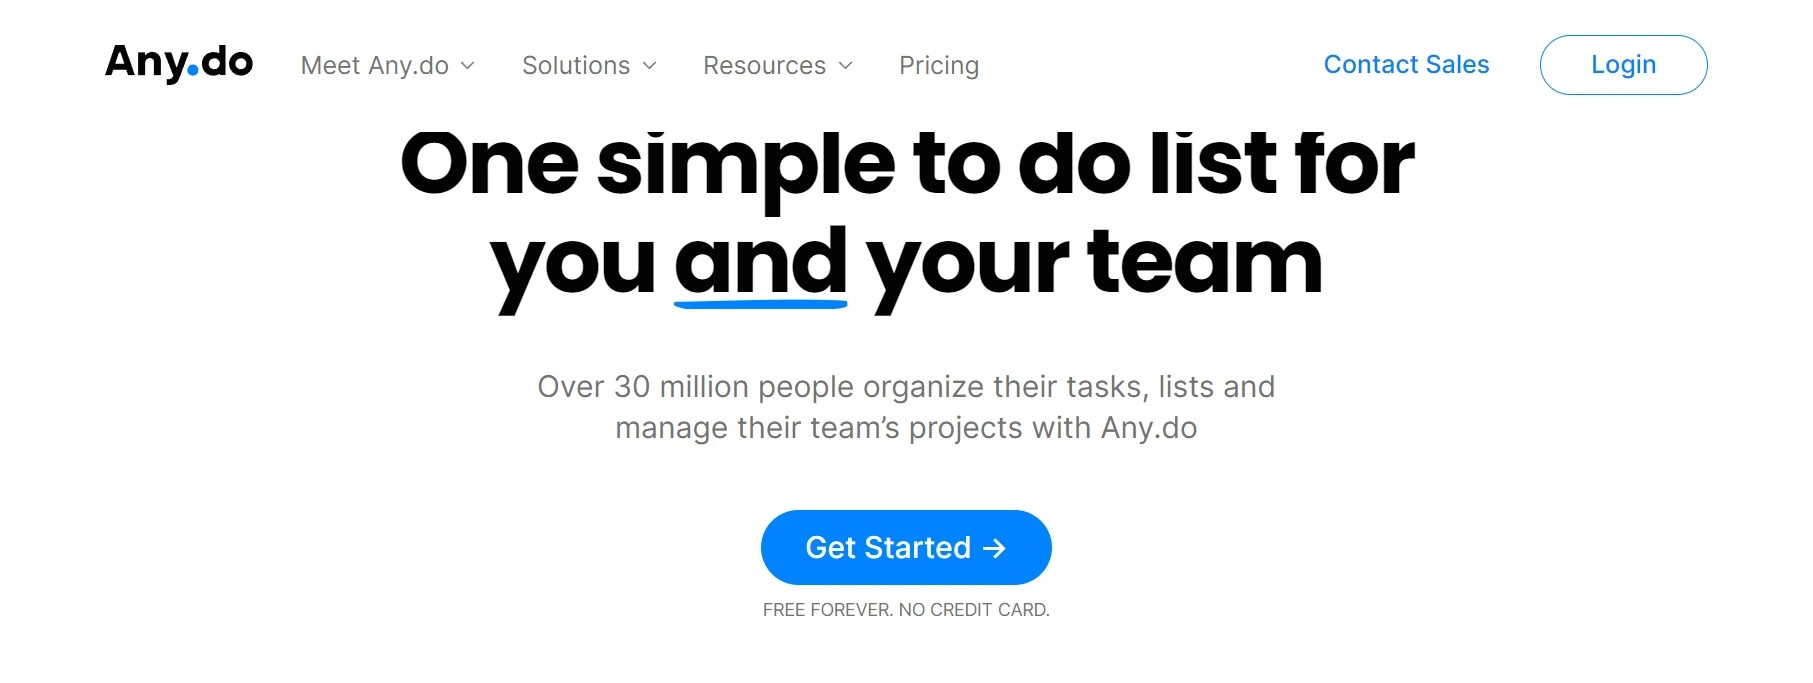 Any.do allows you to create tasks, set reminders, and collaborate with others